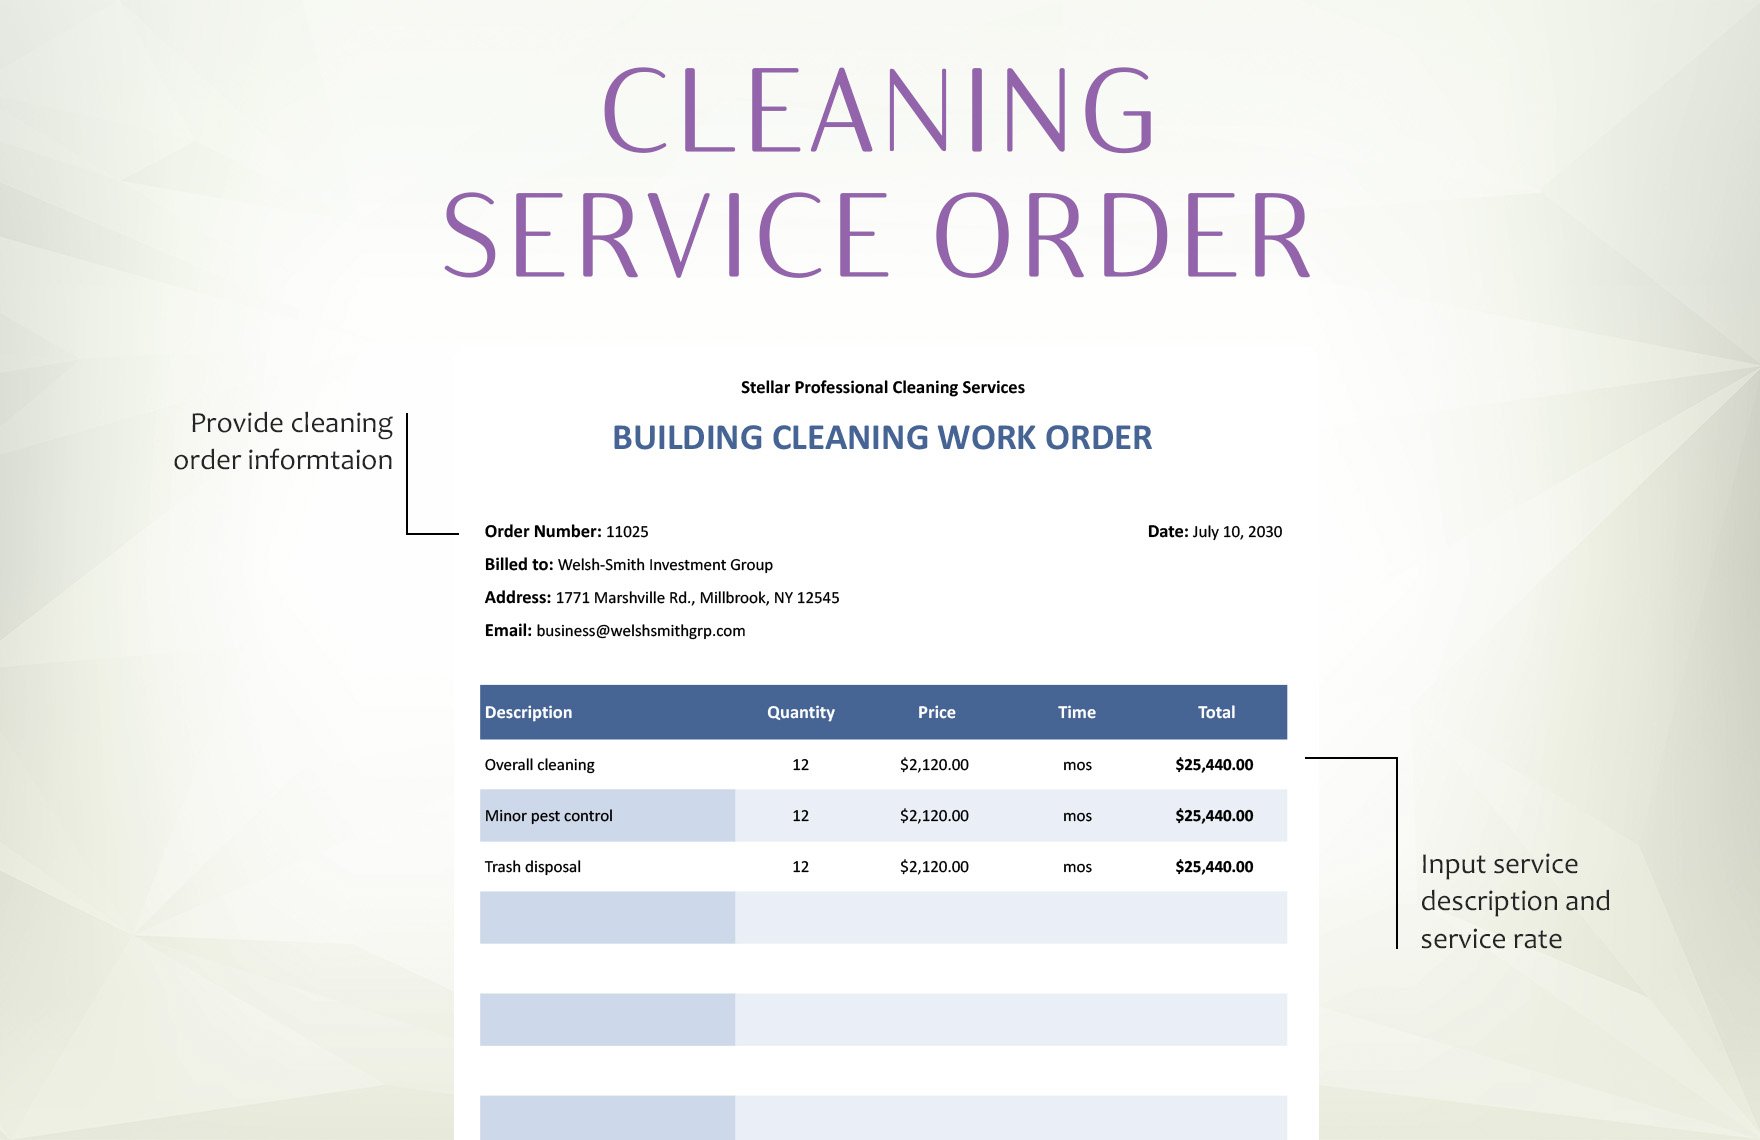 Professional Cleaning Service Order Template